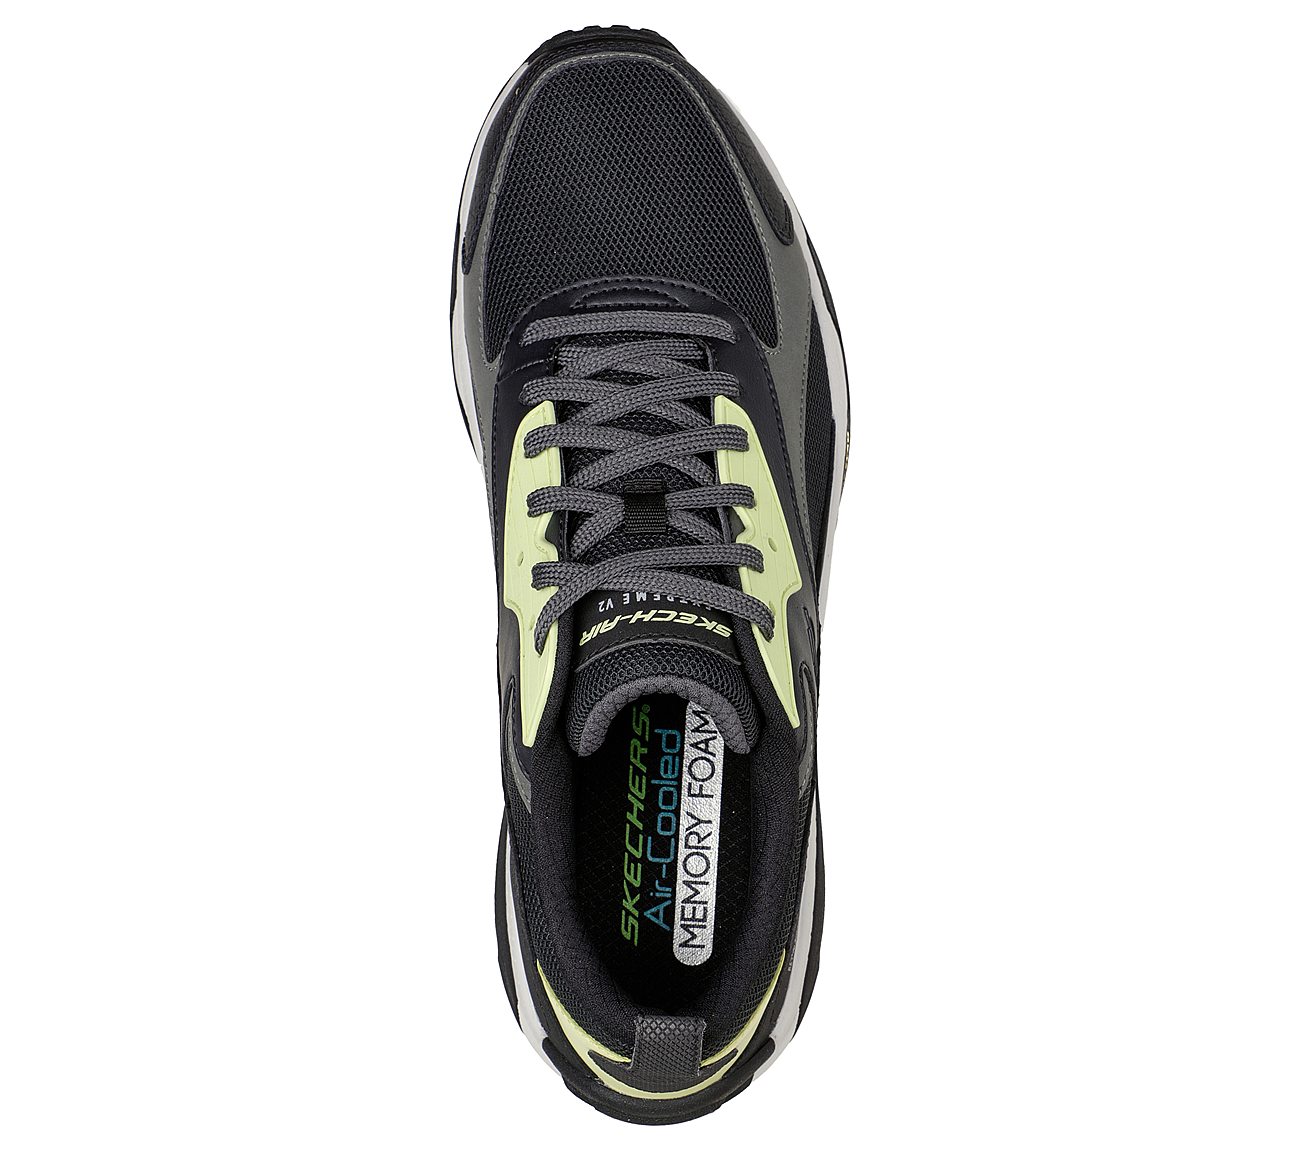 SKECH-AIR EXTREME V2, BLACK/LIME Footwear Top View